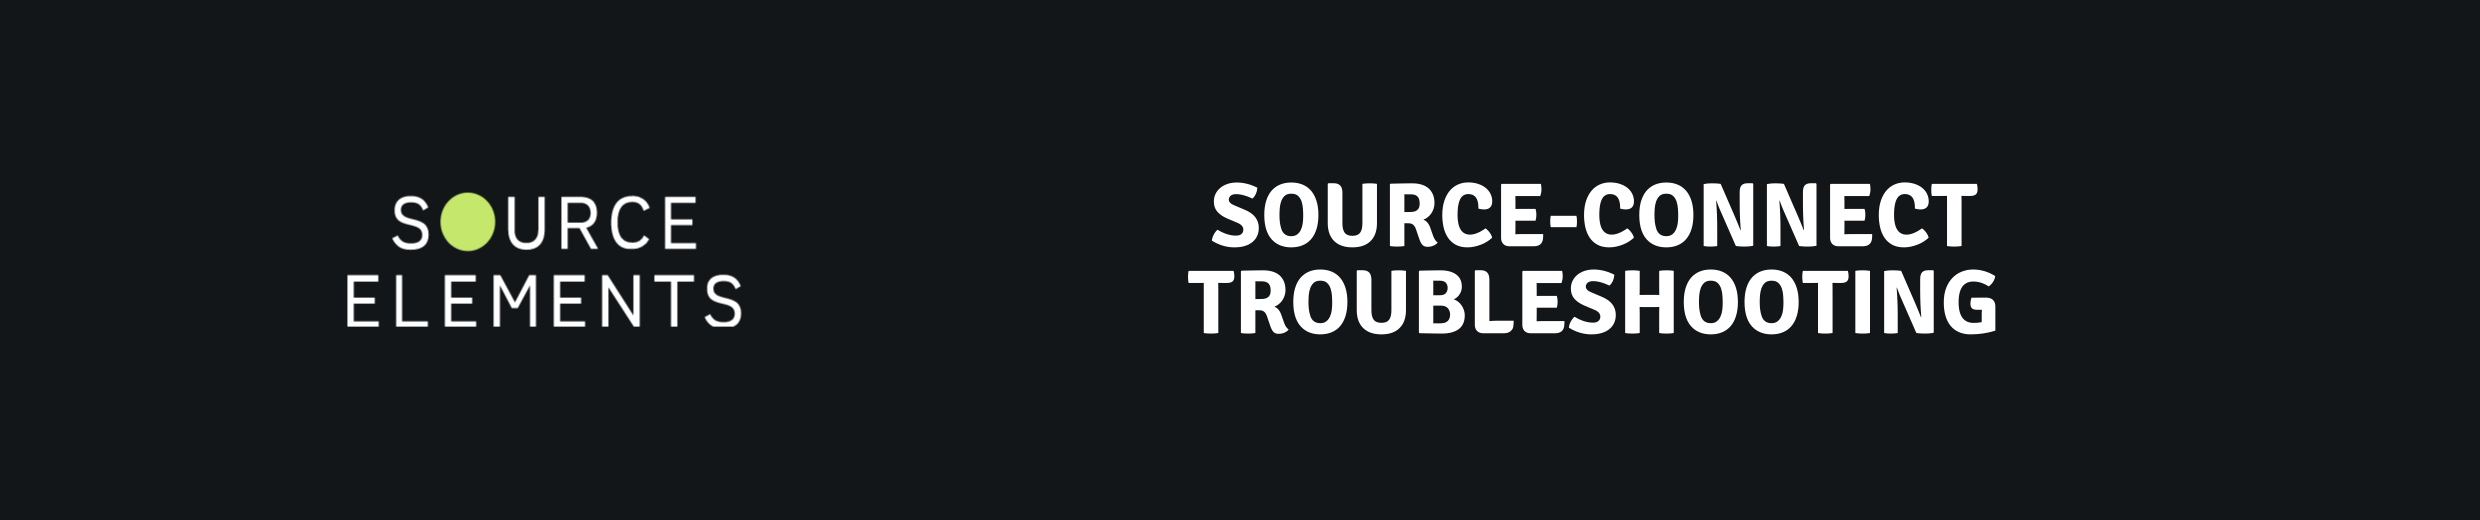 Source-Connect Troubleshooting